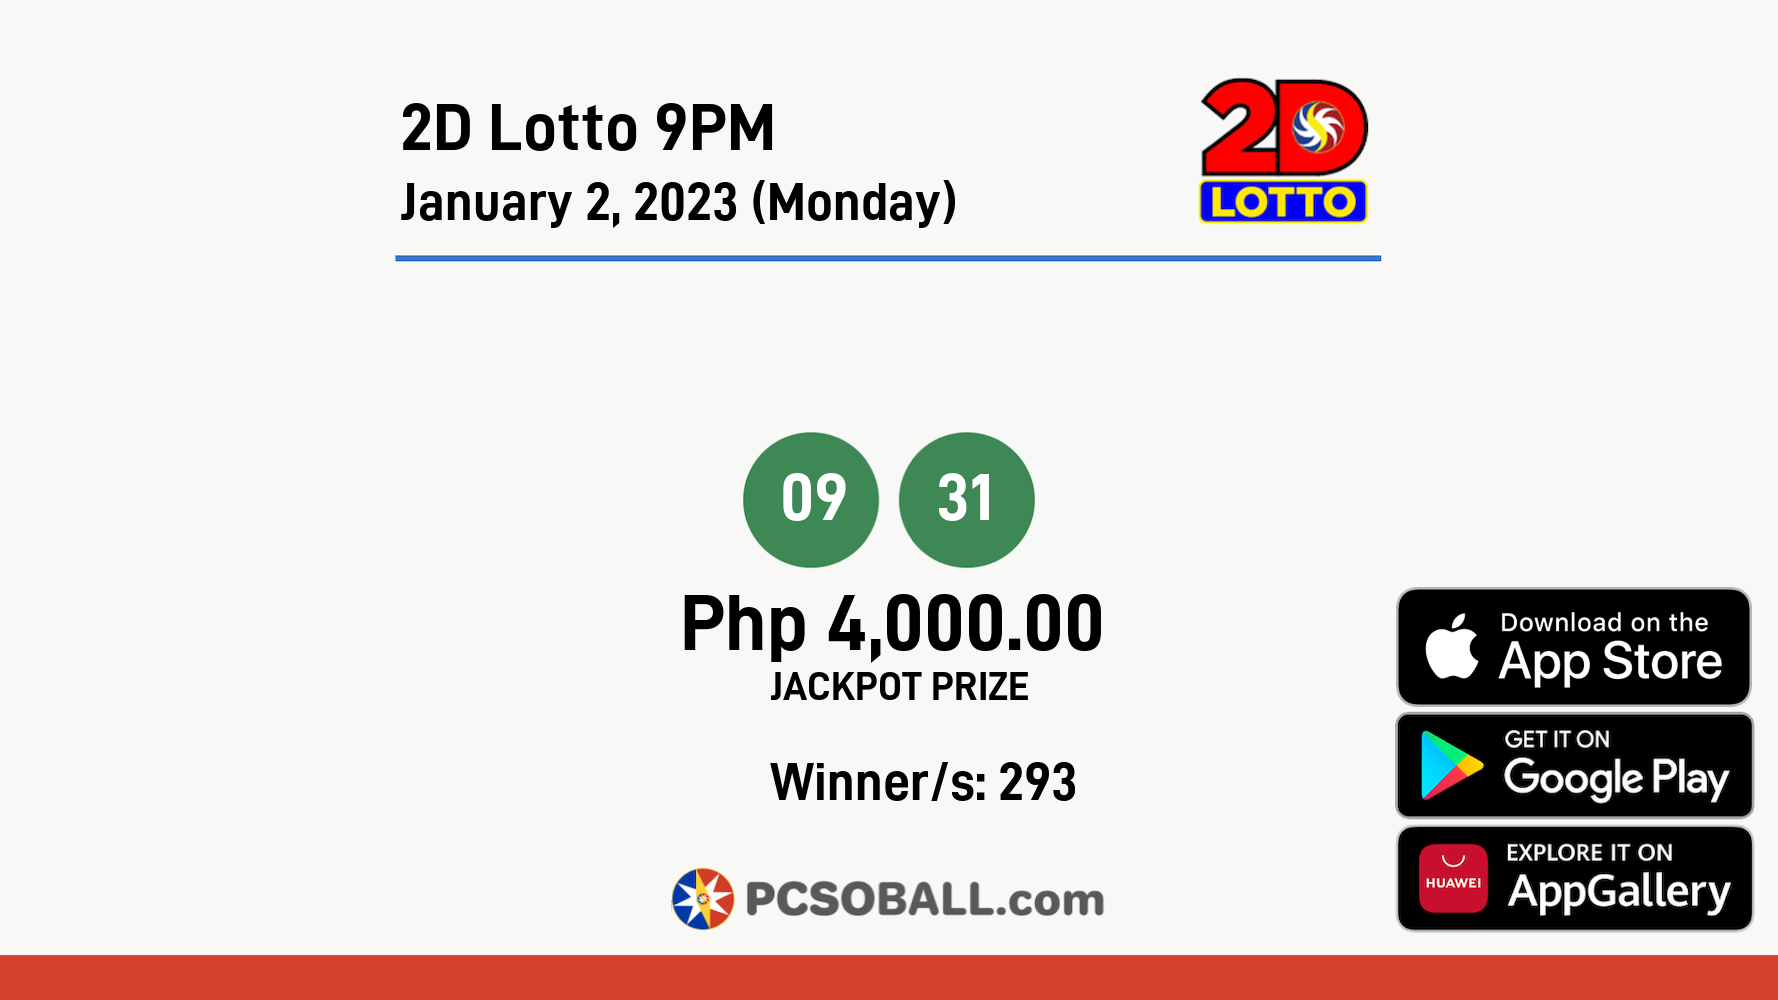 2D Lotto 9PM January 2, 2023 (Monday) Result